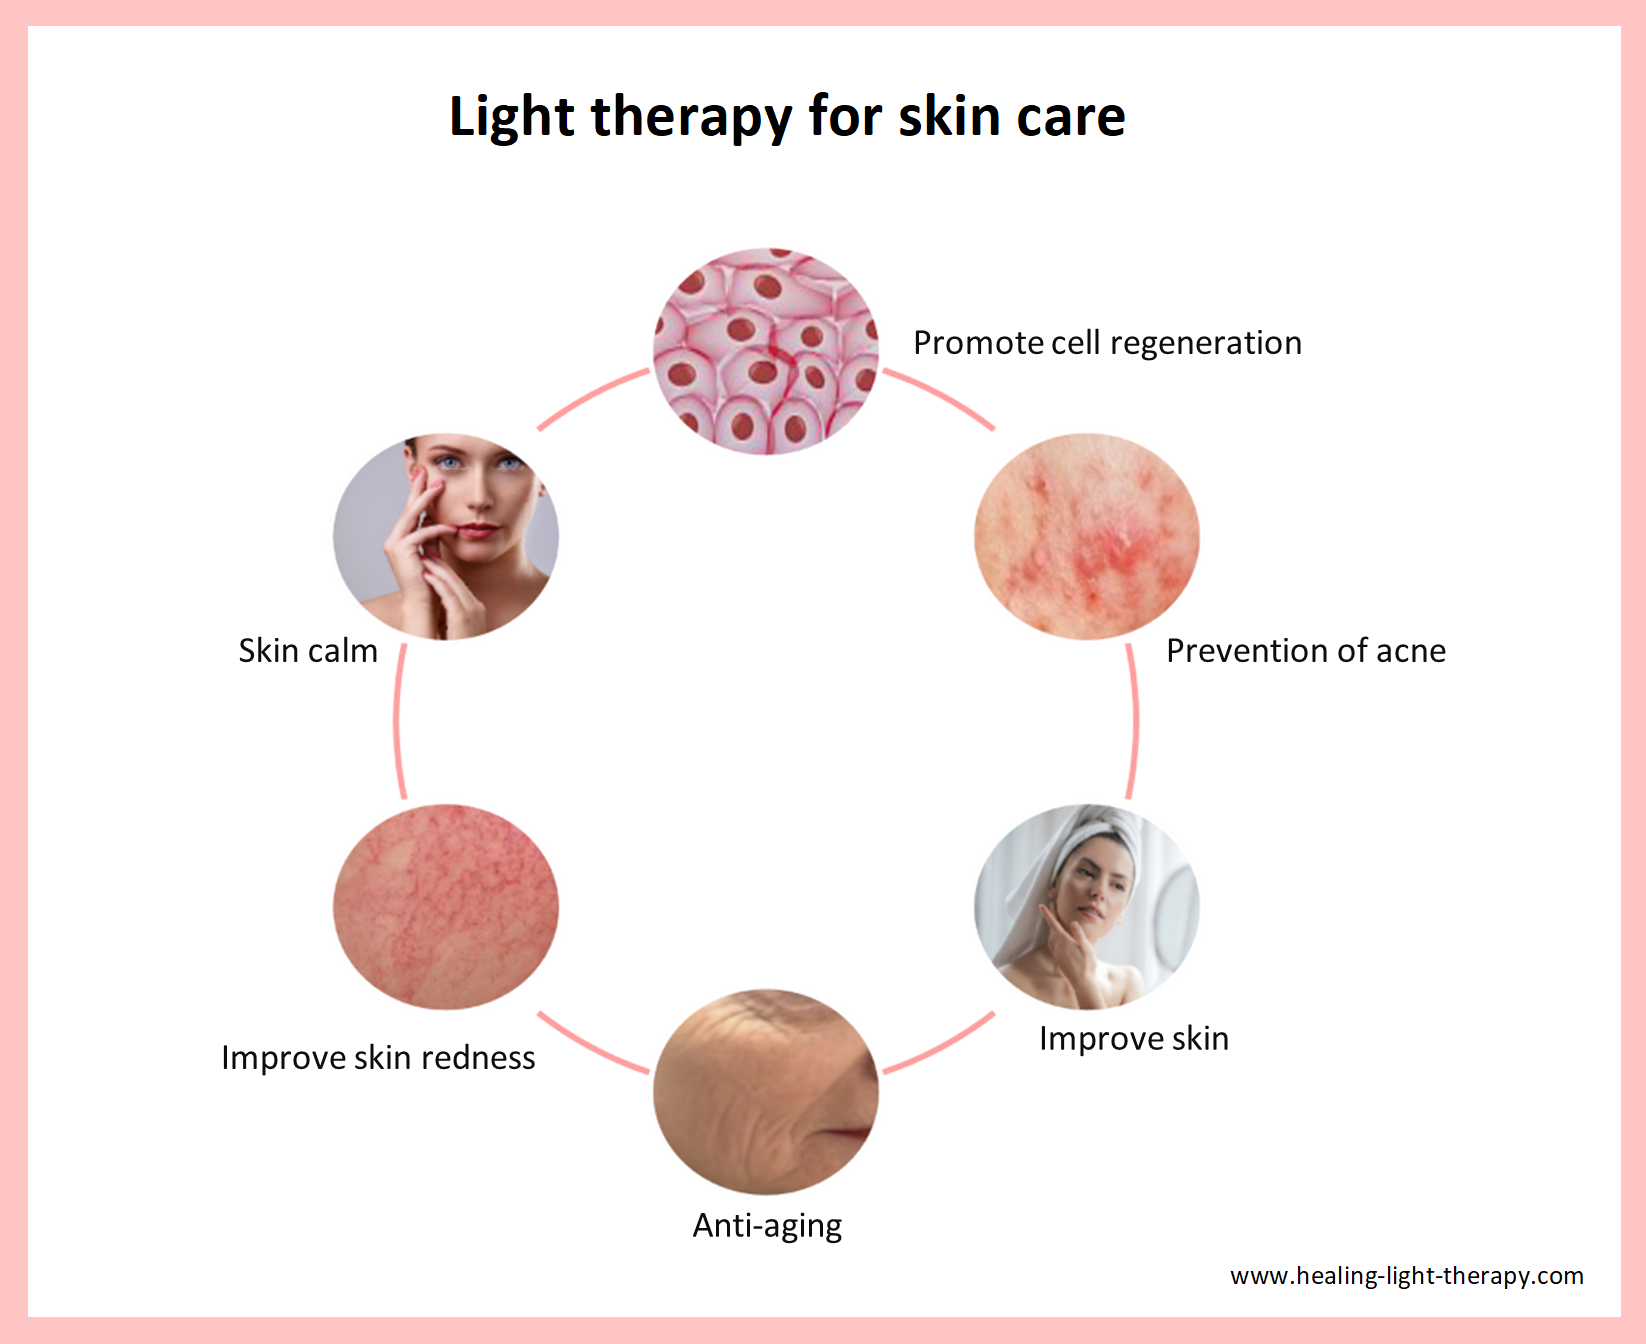 Benefits of light therapy for skin care